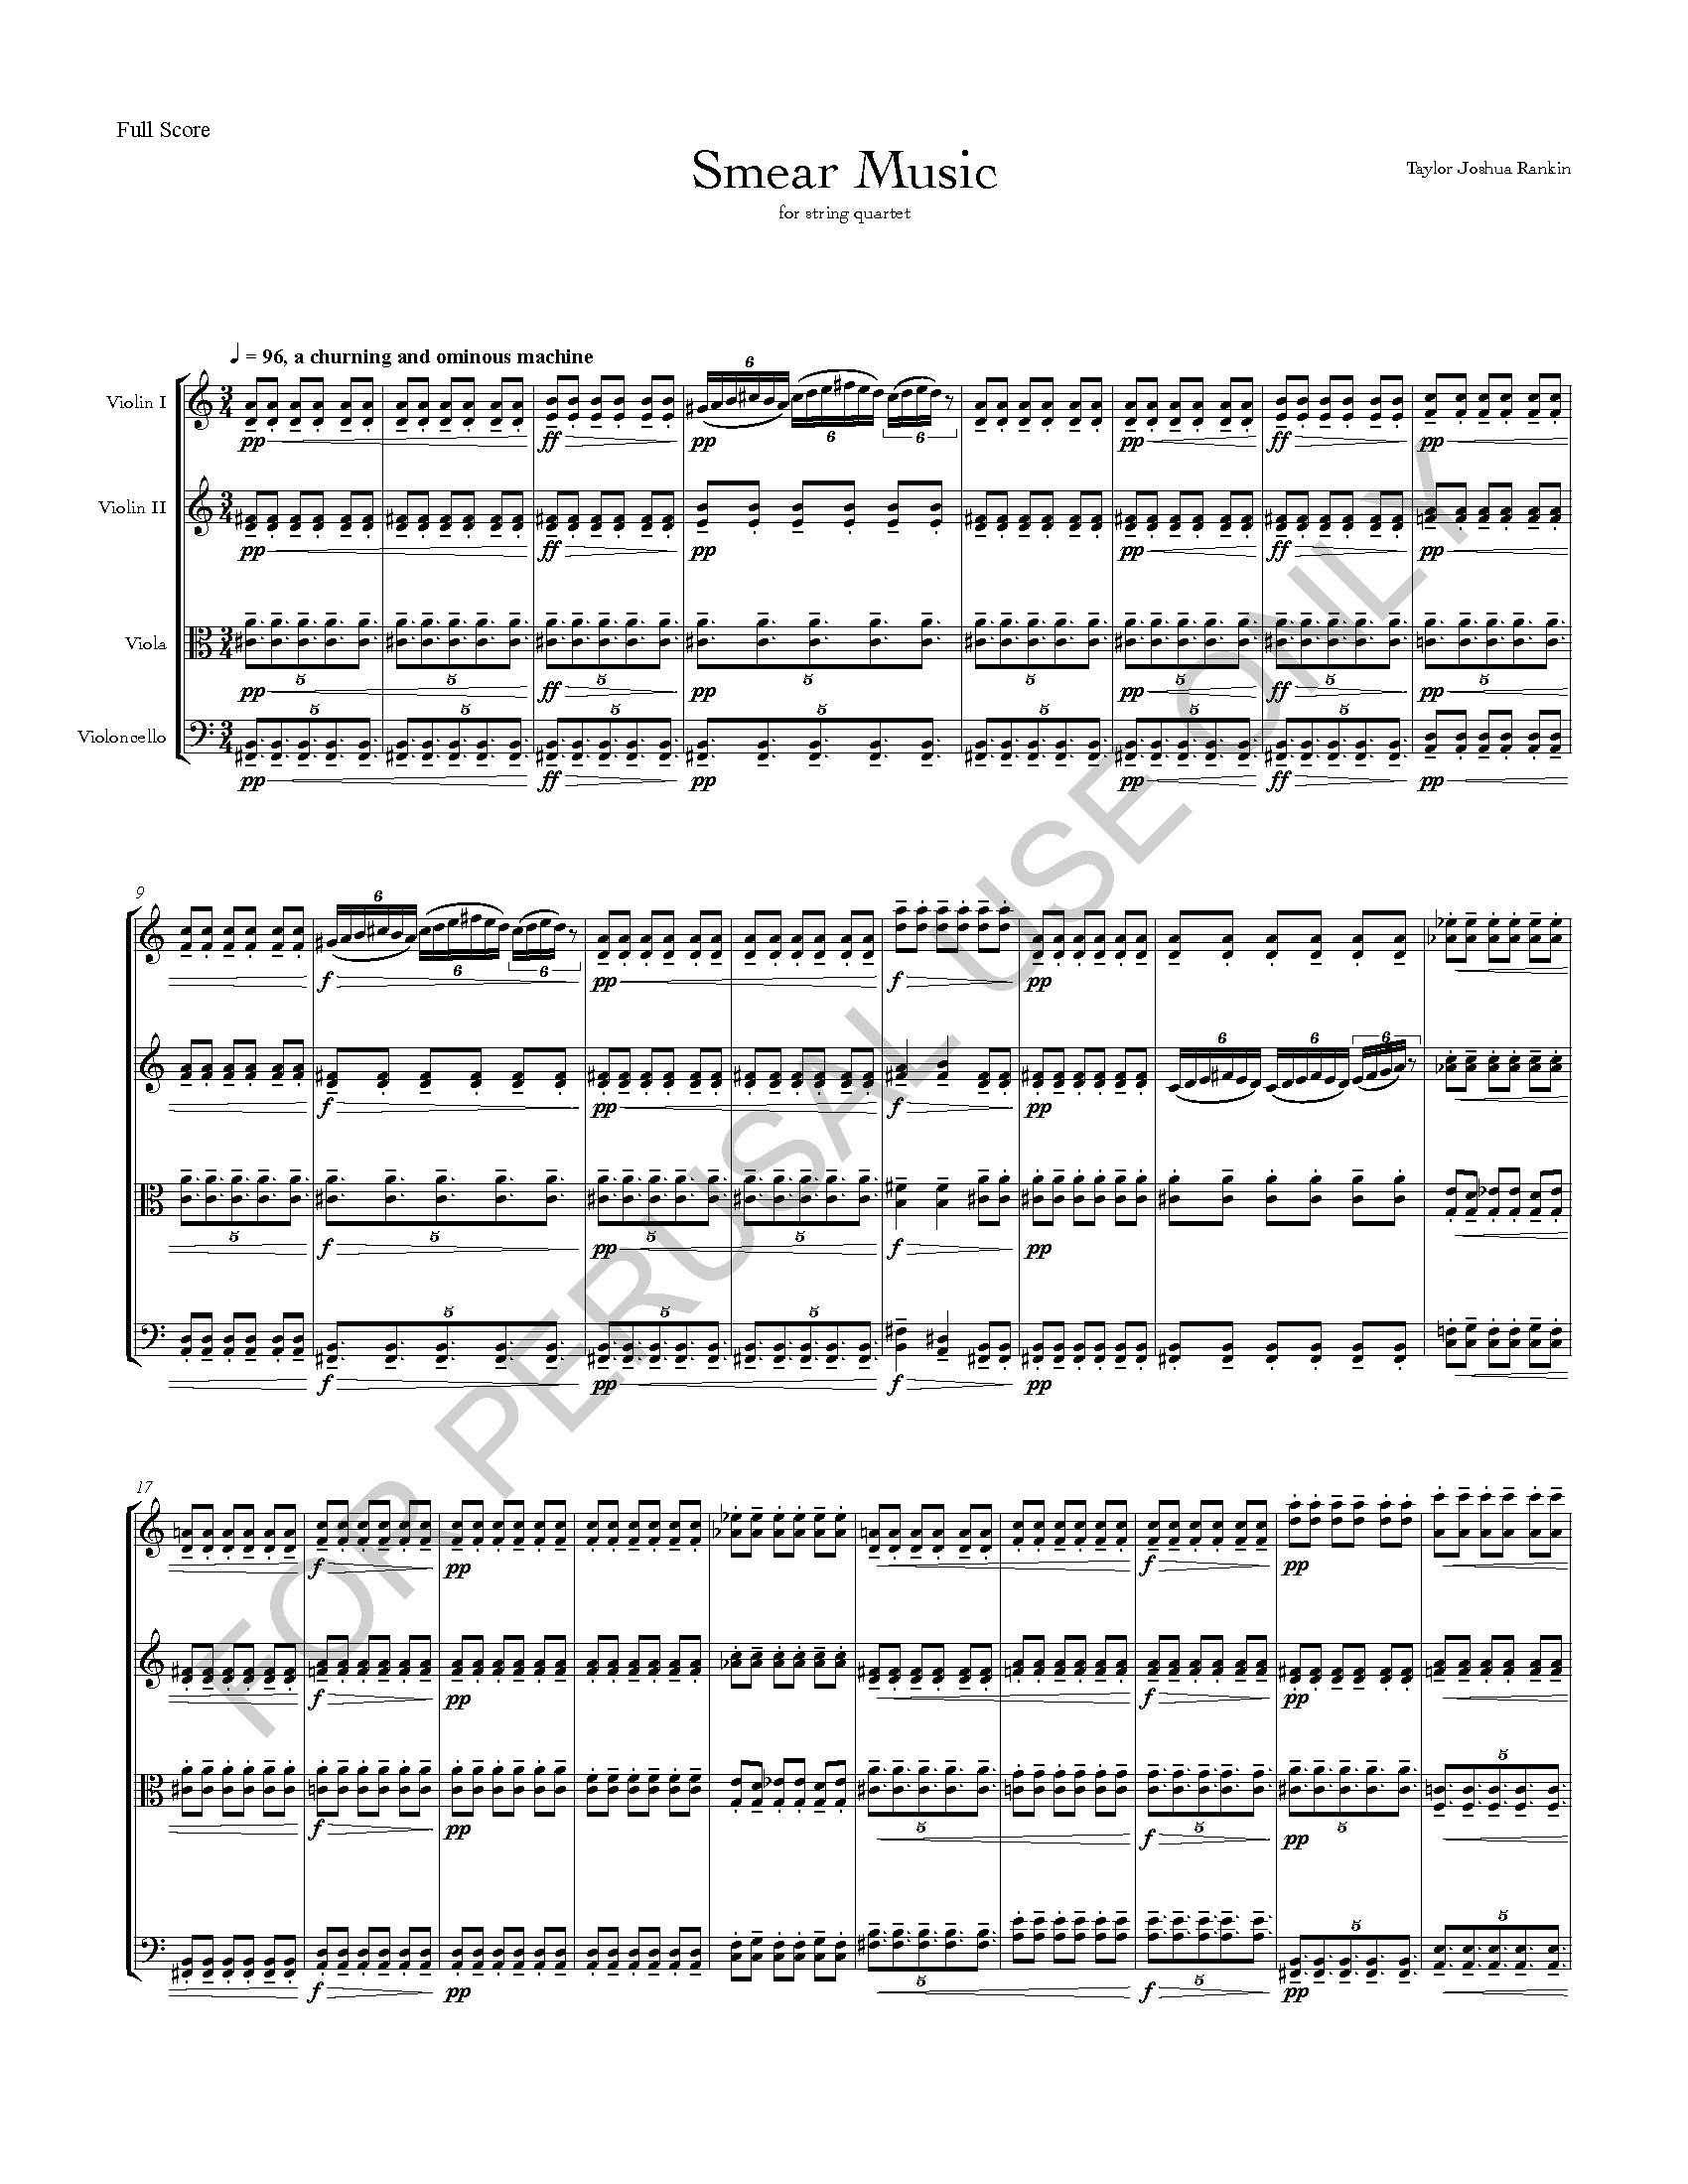 REFERENCE Smear Music (Full Score)_Page_01.jpg